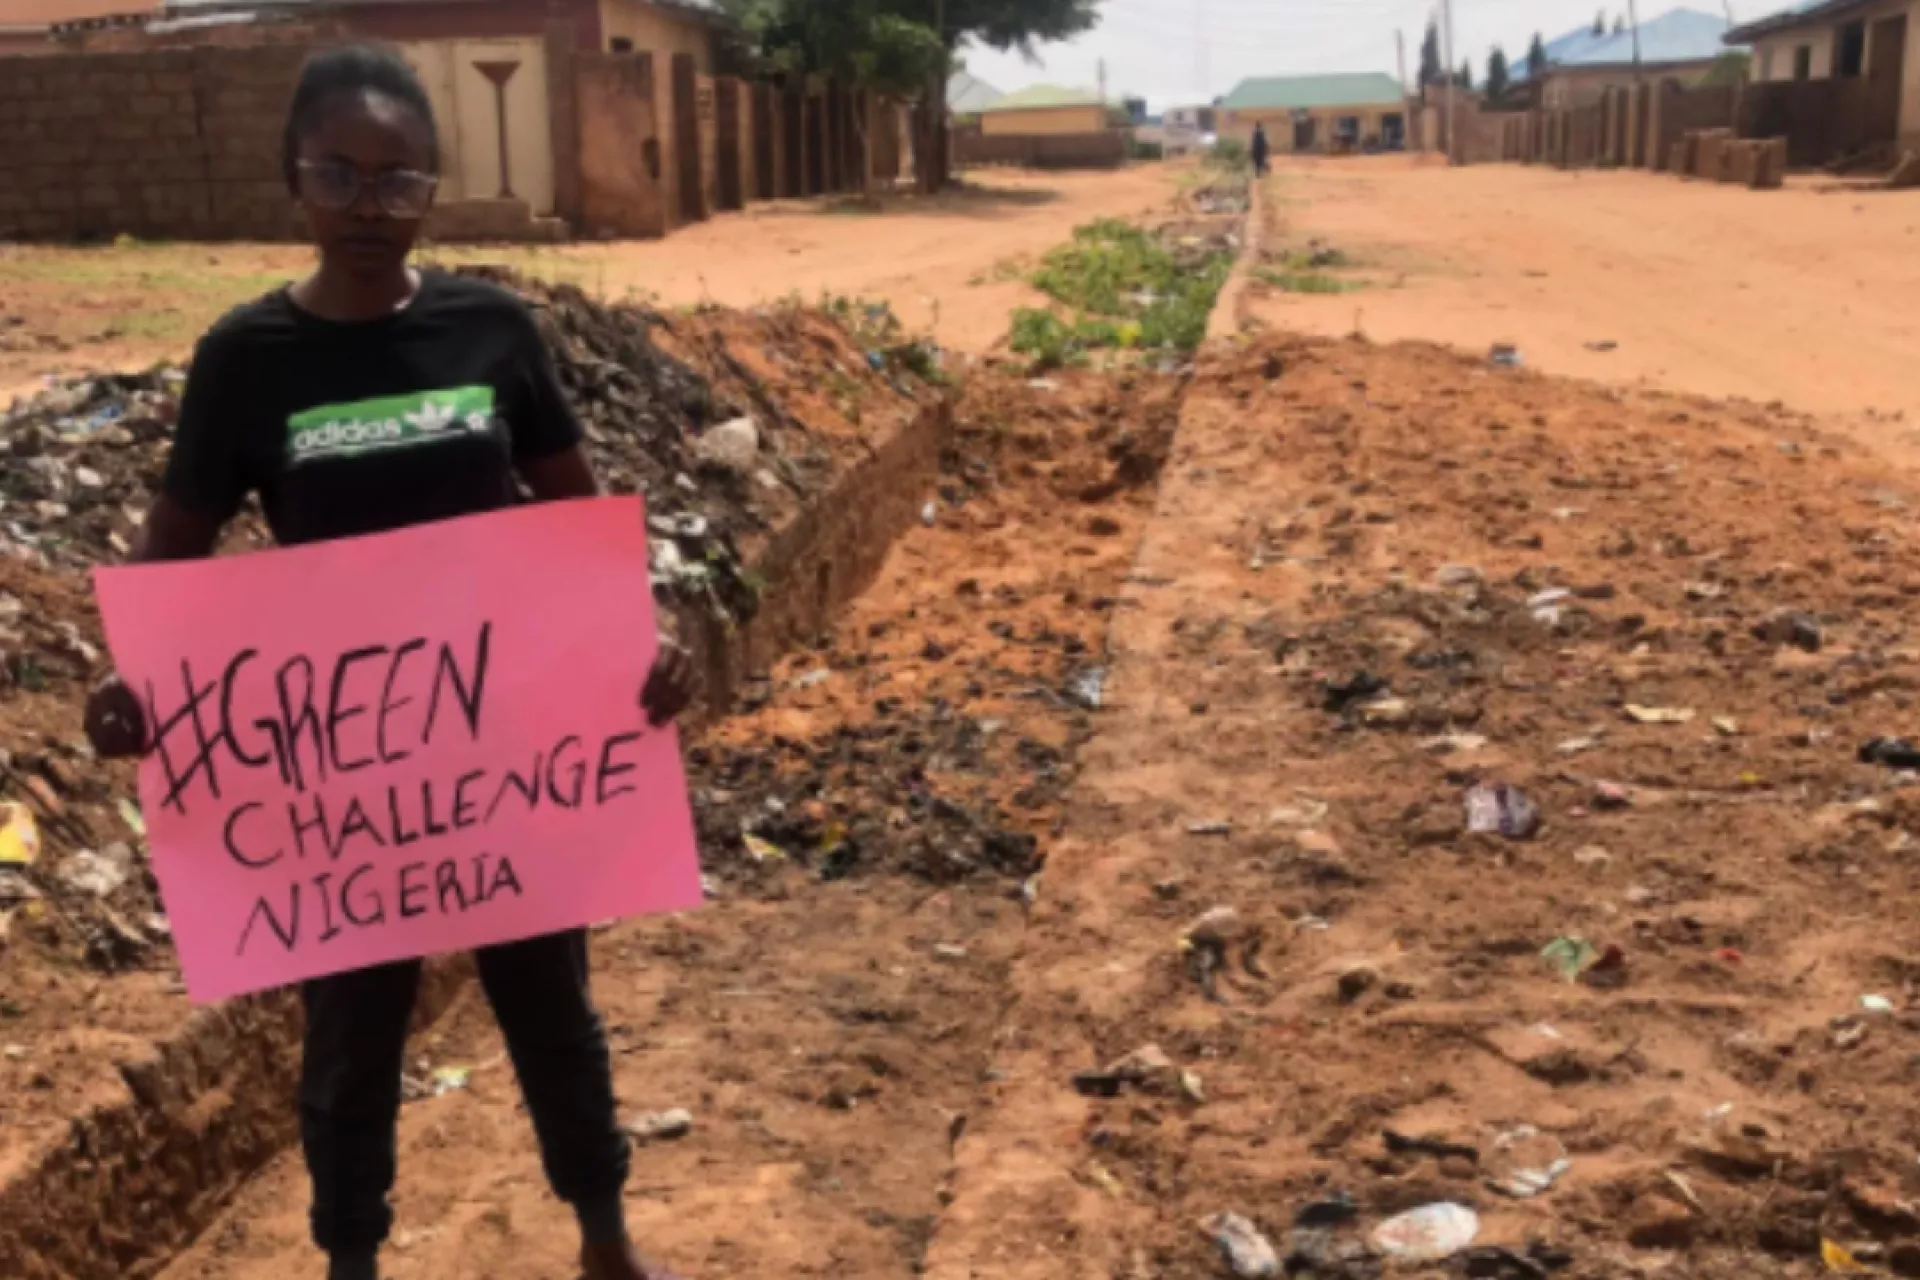 A young Nigerian girl stands on a dirt road holding a sign about the green challenge